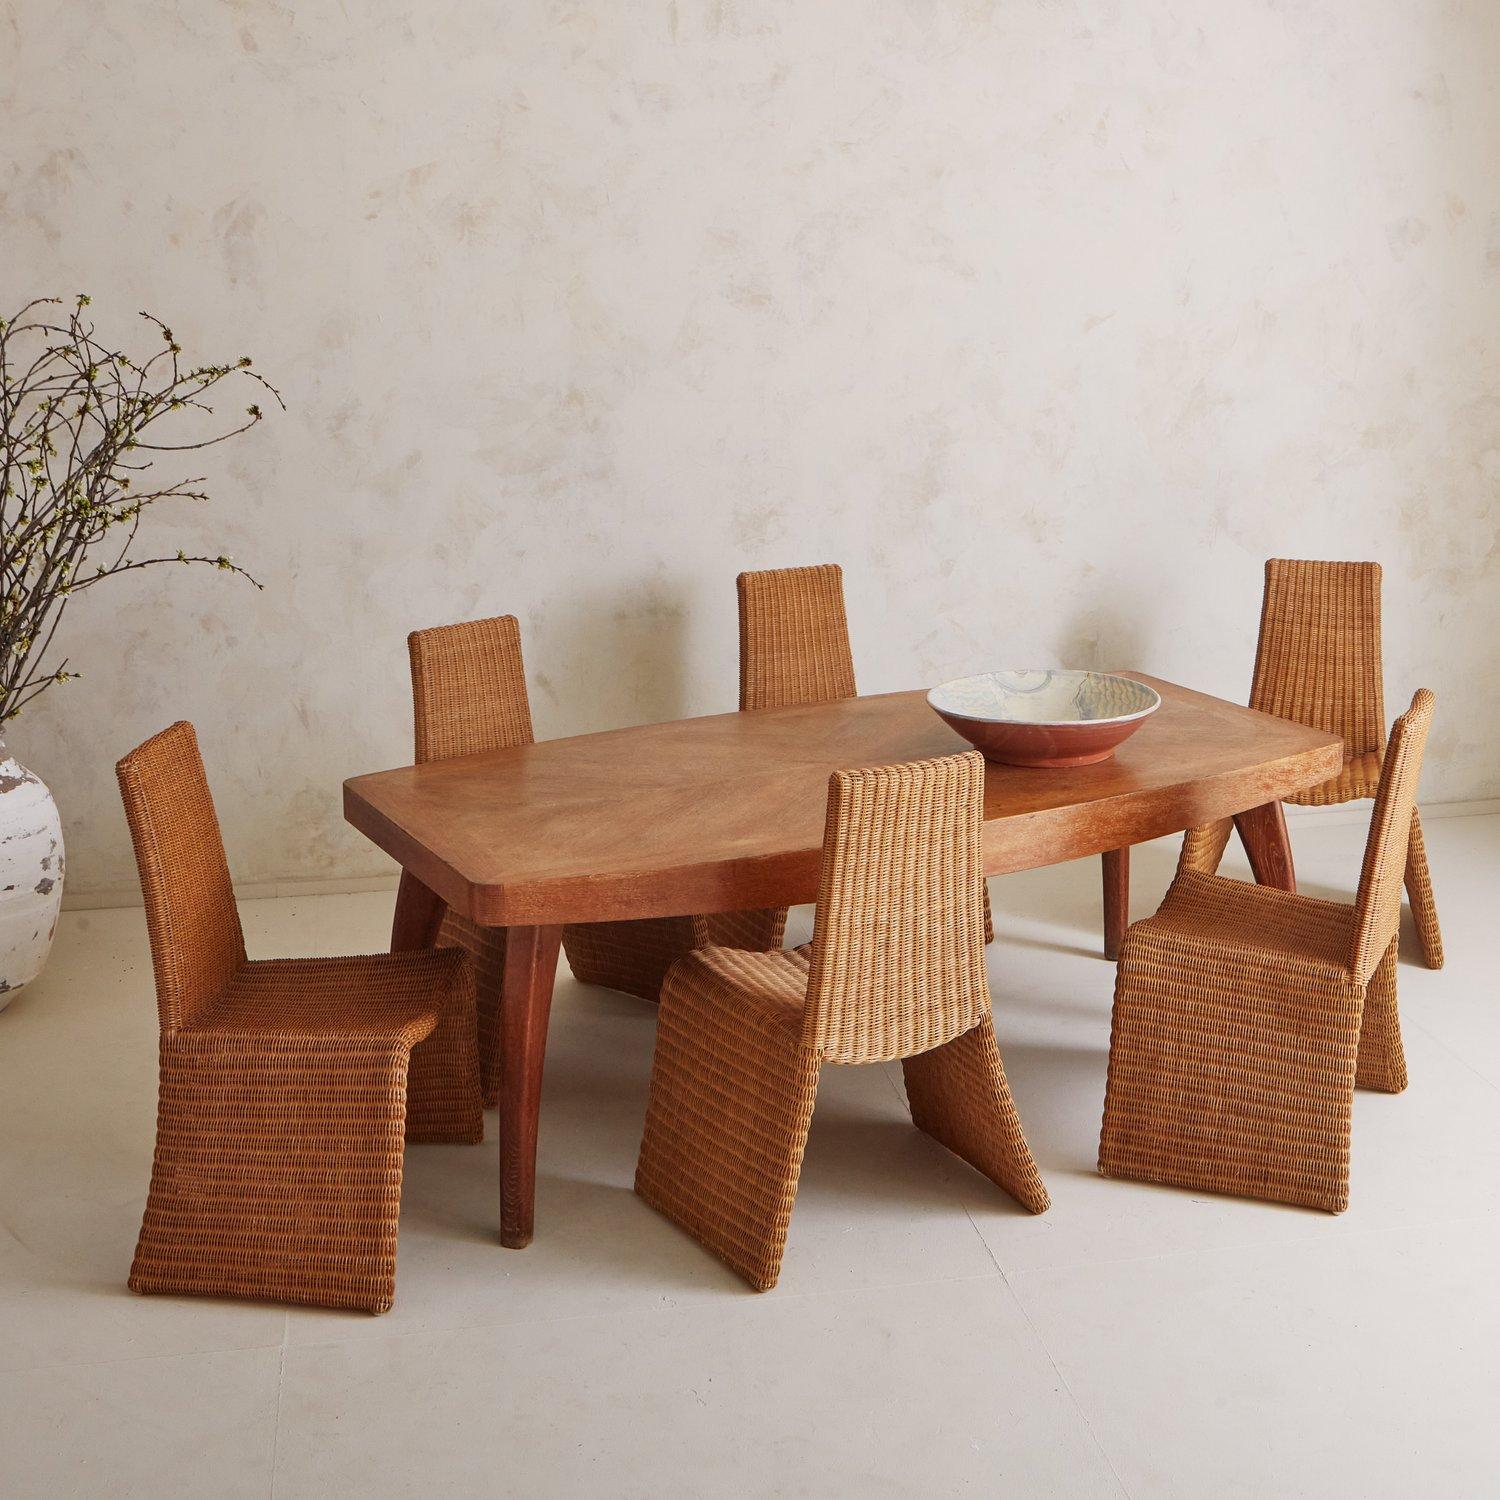 Spanish Set of 5 Sculptural Wicker Dining Chairs, Spain 20th Century